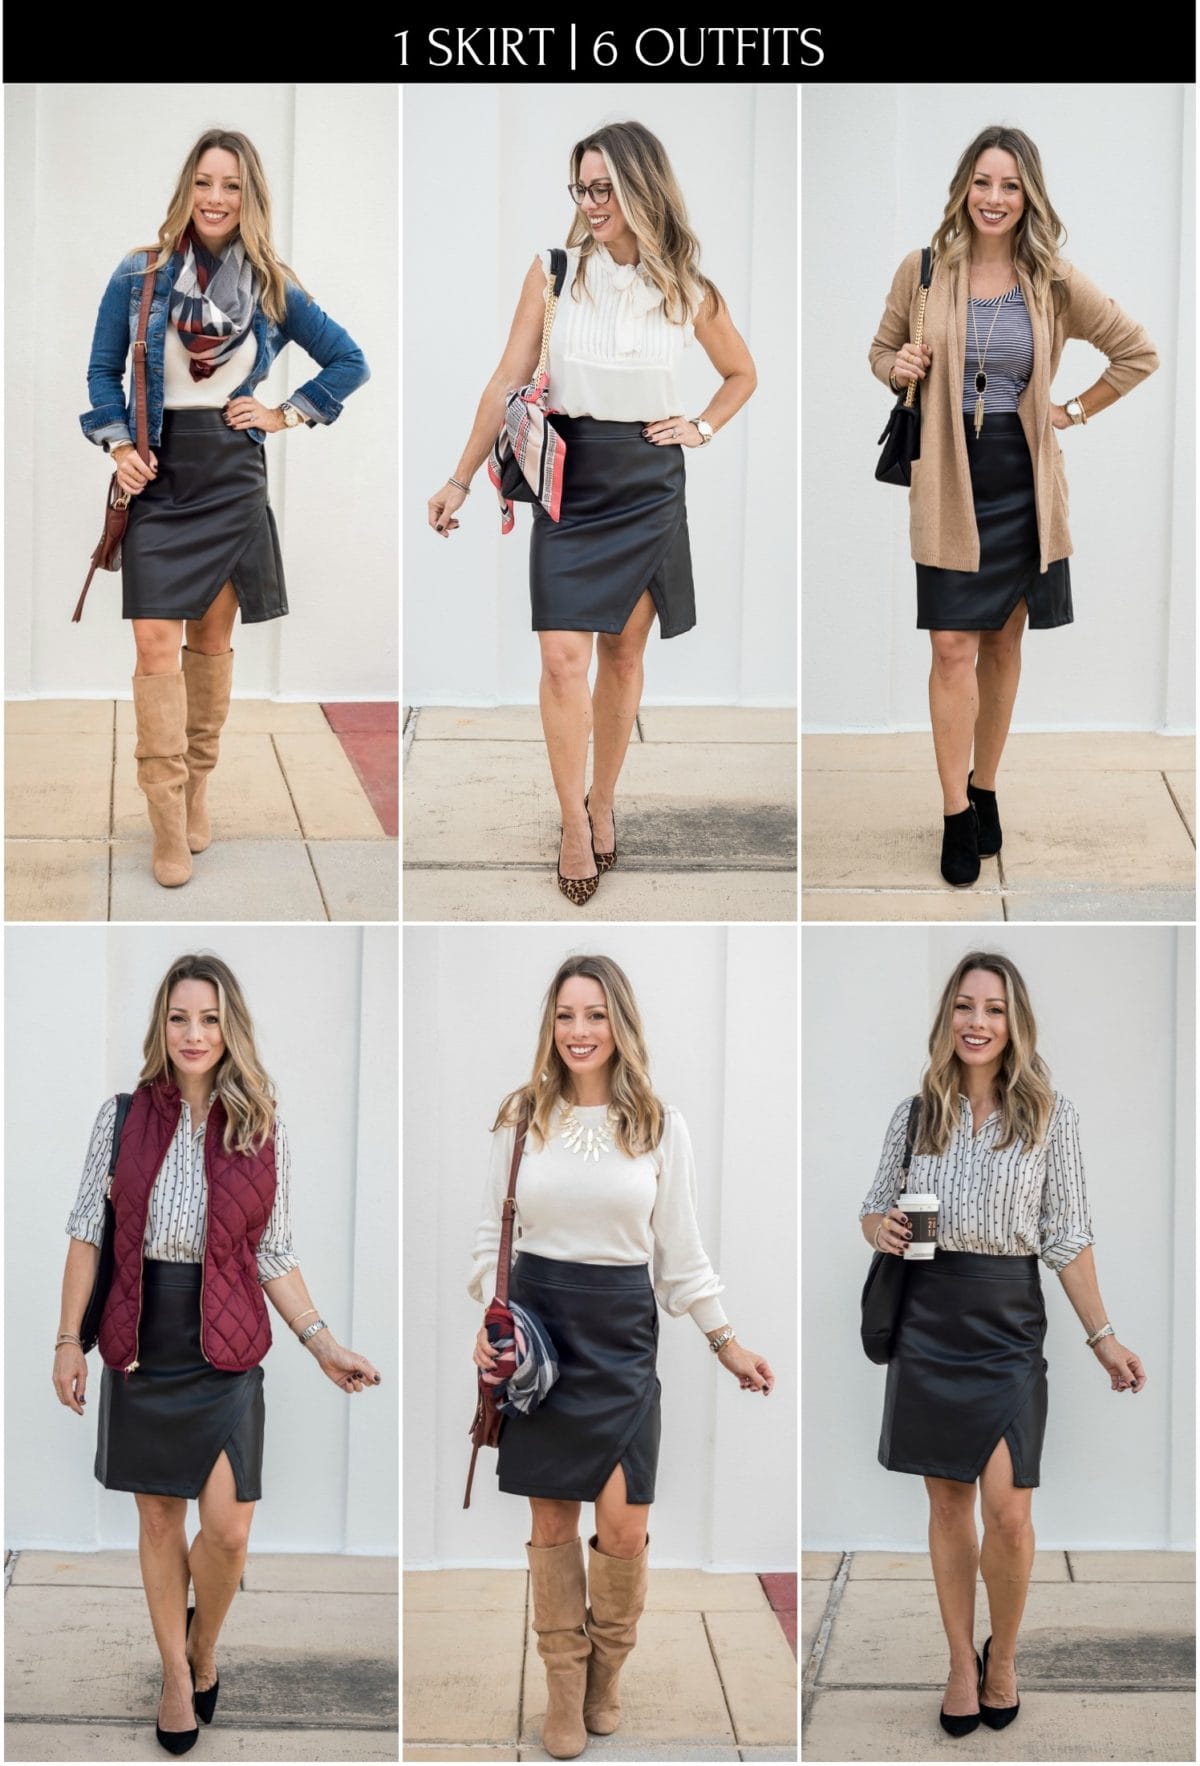 6 Black Leather Skirt Outfit Ideas For ...